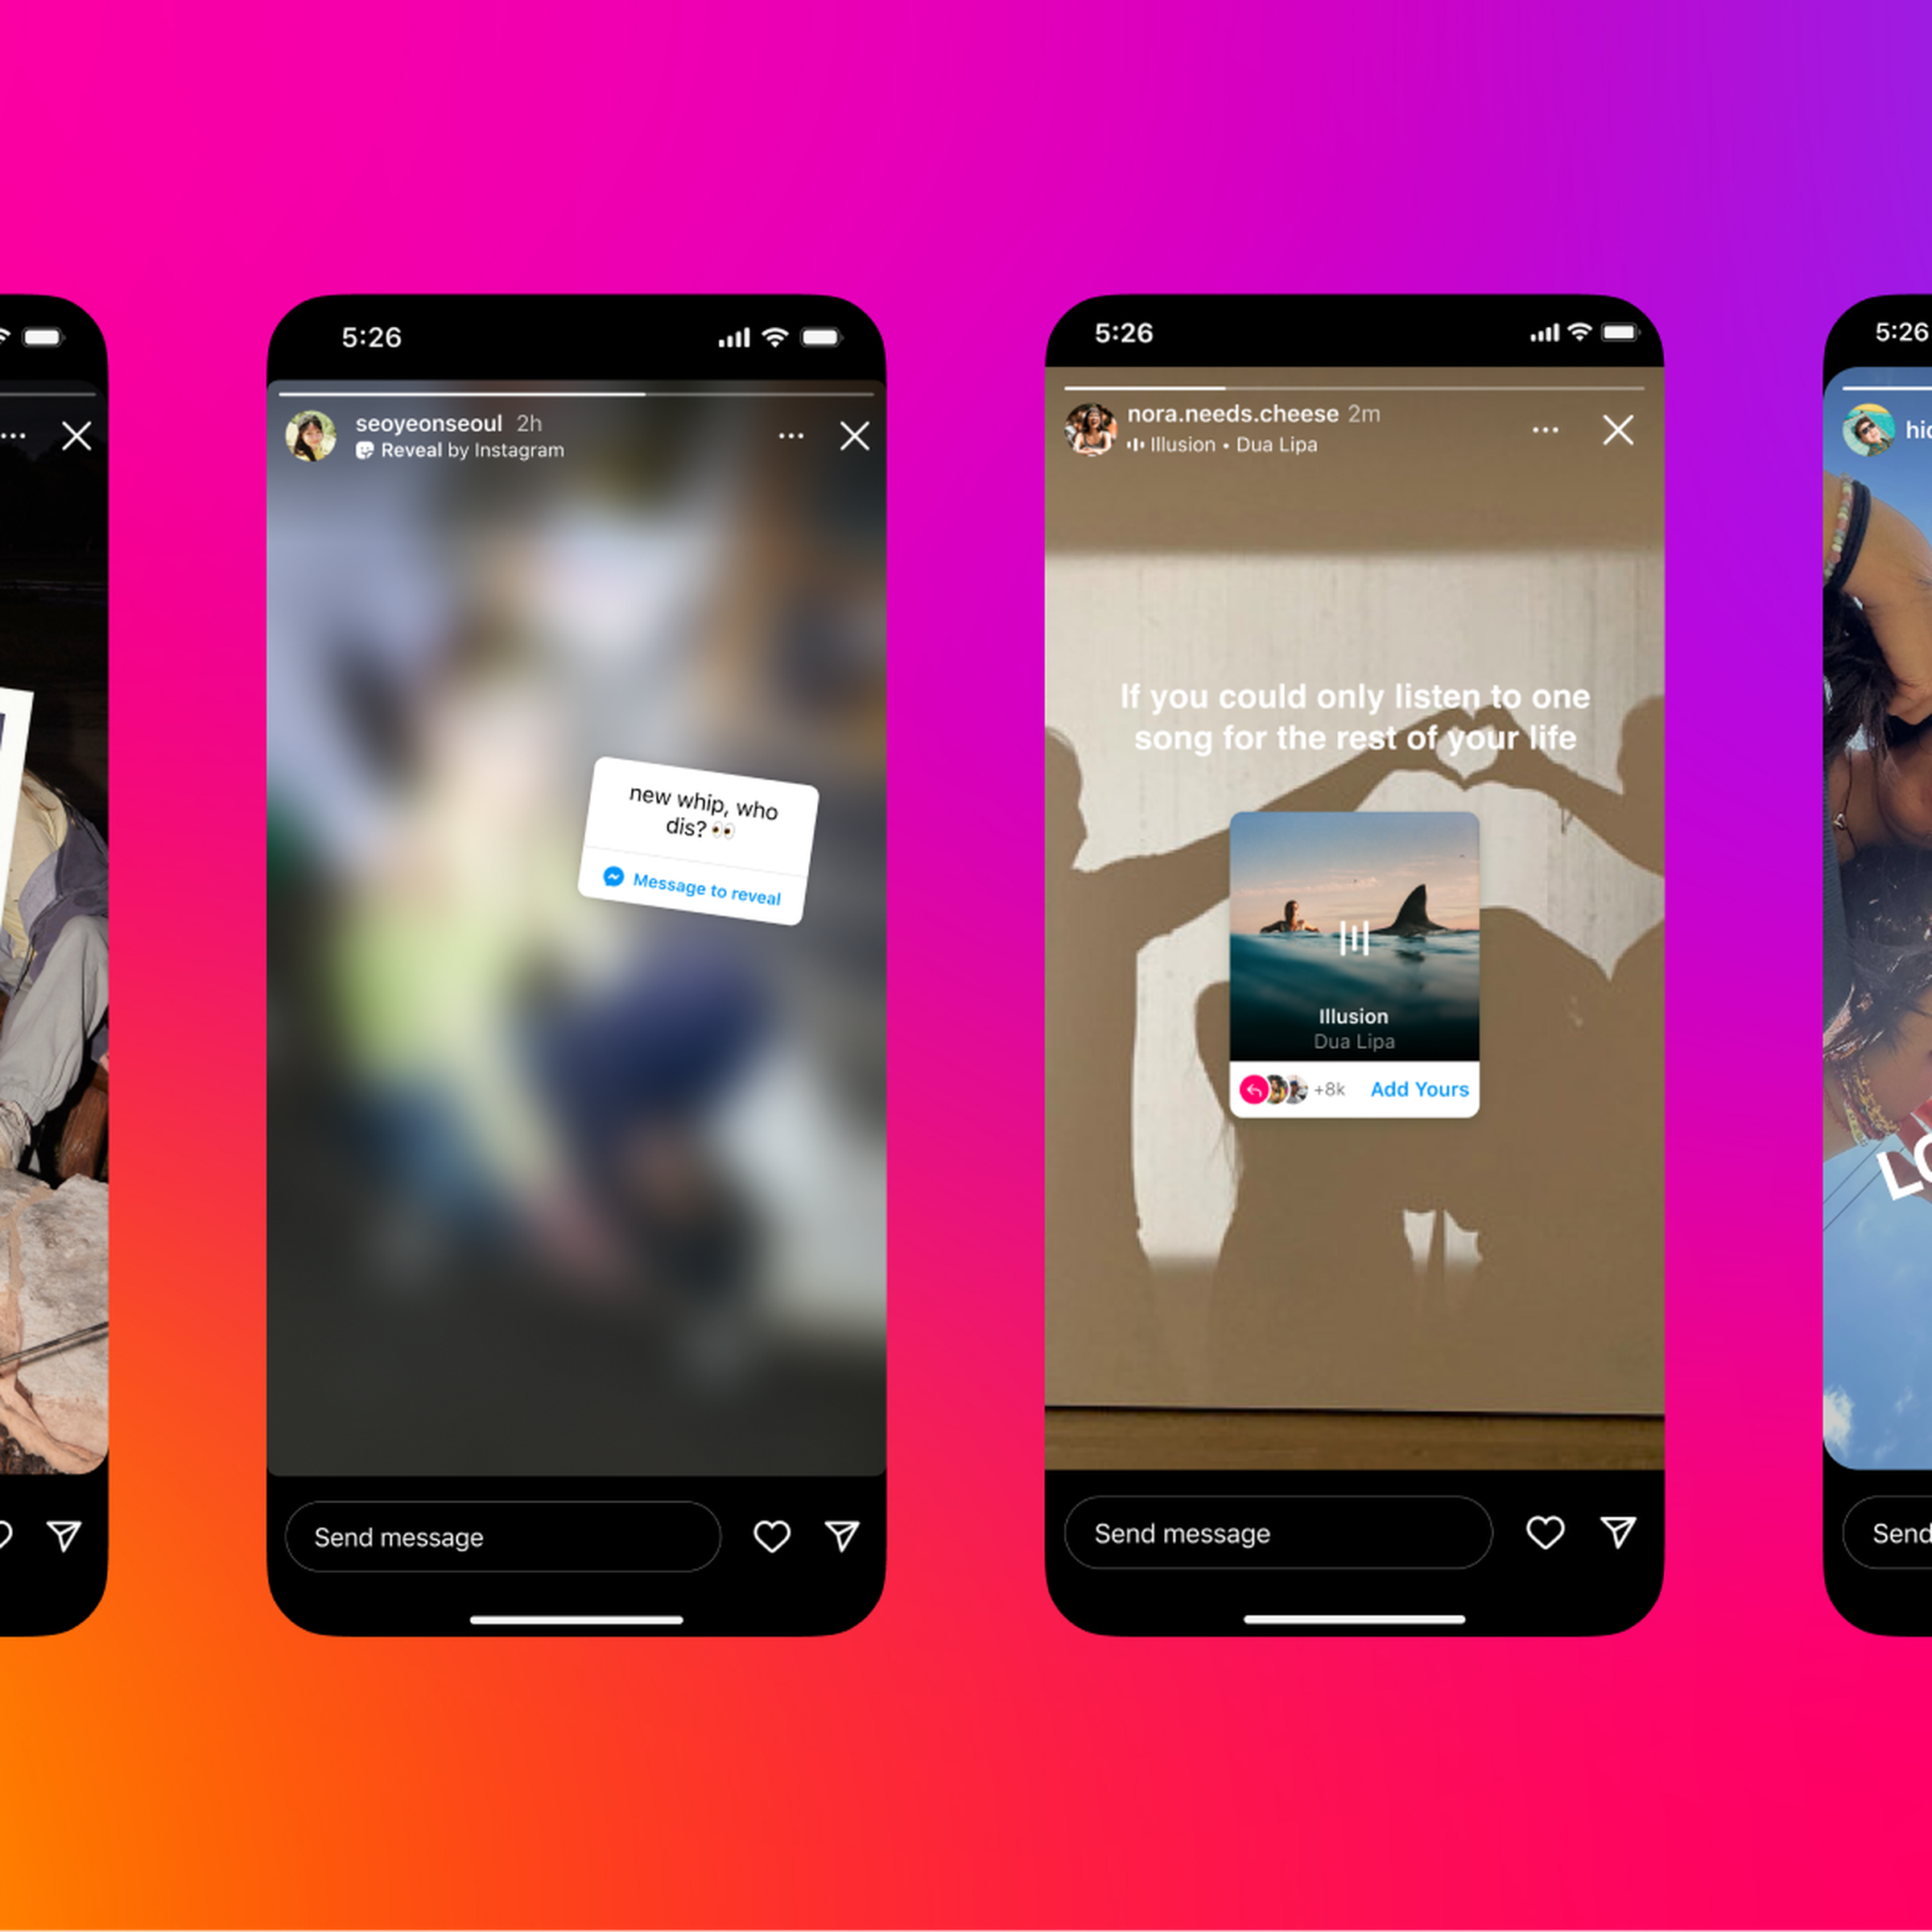 Instagram stickers featuring new photo frames, a blurring effect, and music sharing features.